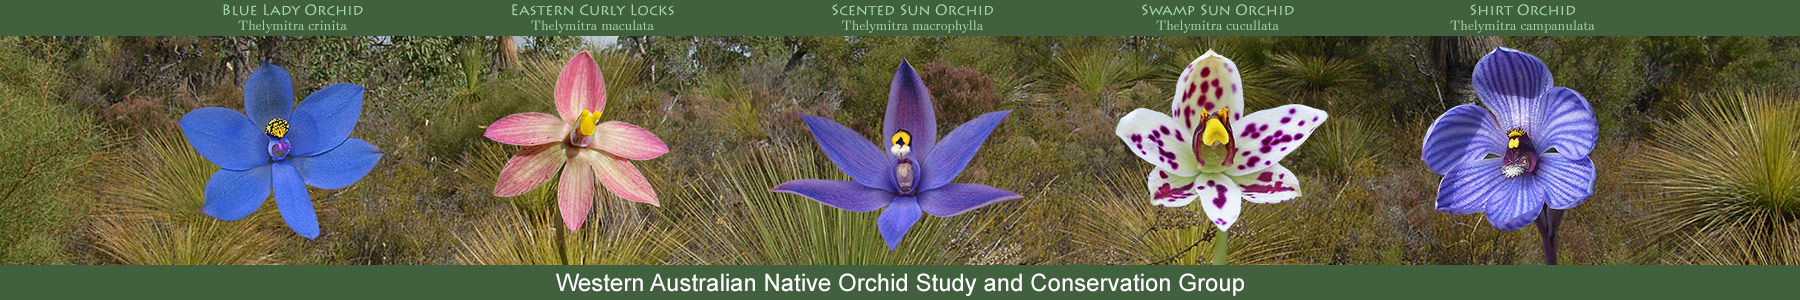 Western Australian Native Orchid Study and Conservation Group Inc.